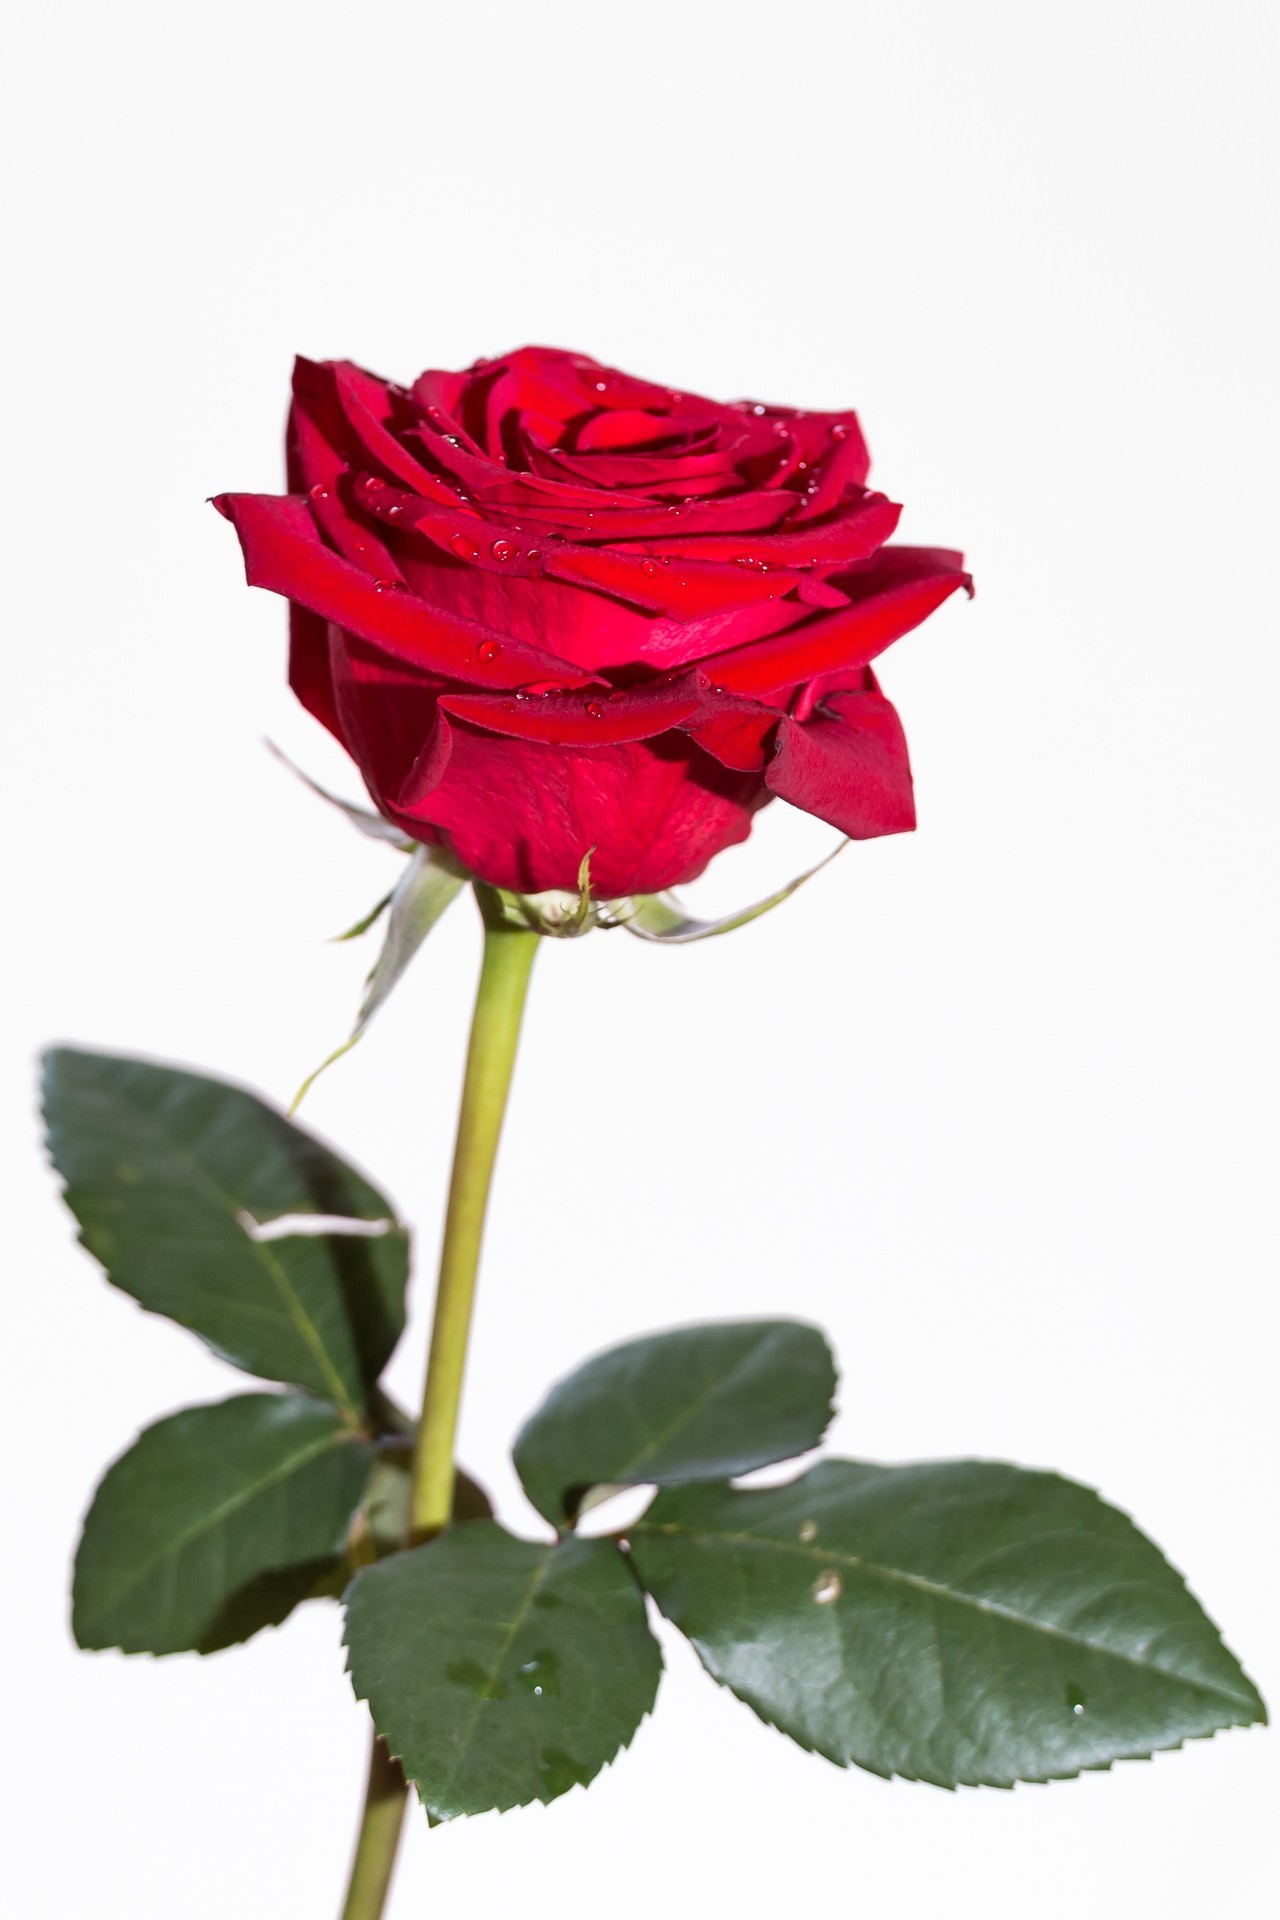 1280x1920 Red Rose On White Background